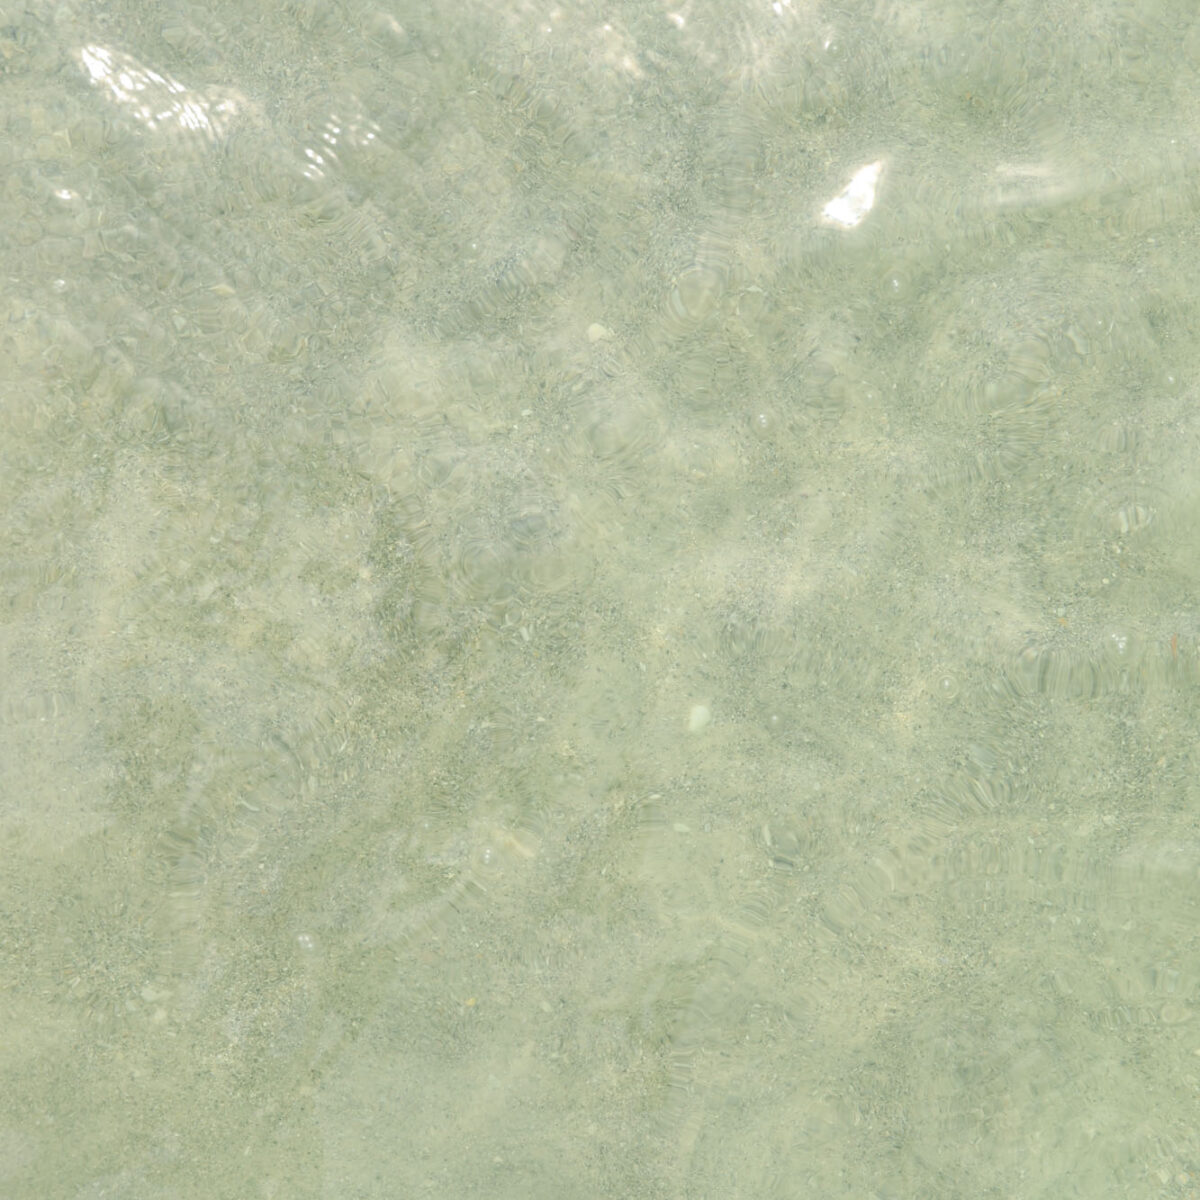 Water and Sand Textures Preview 06